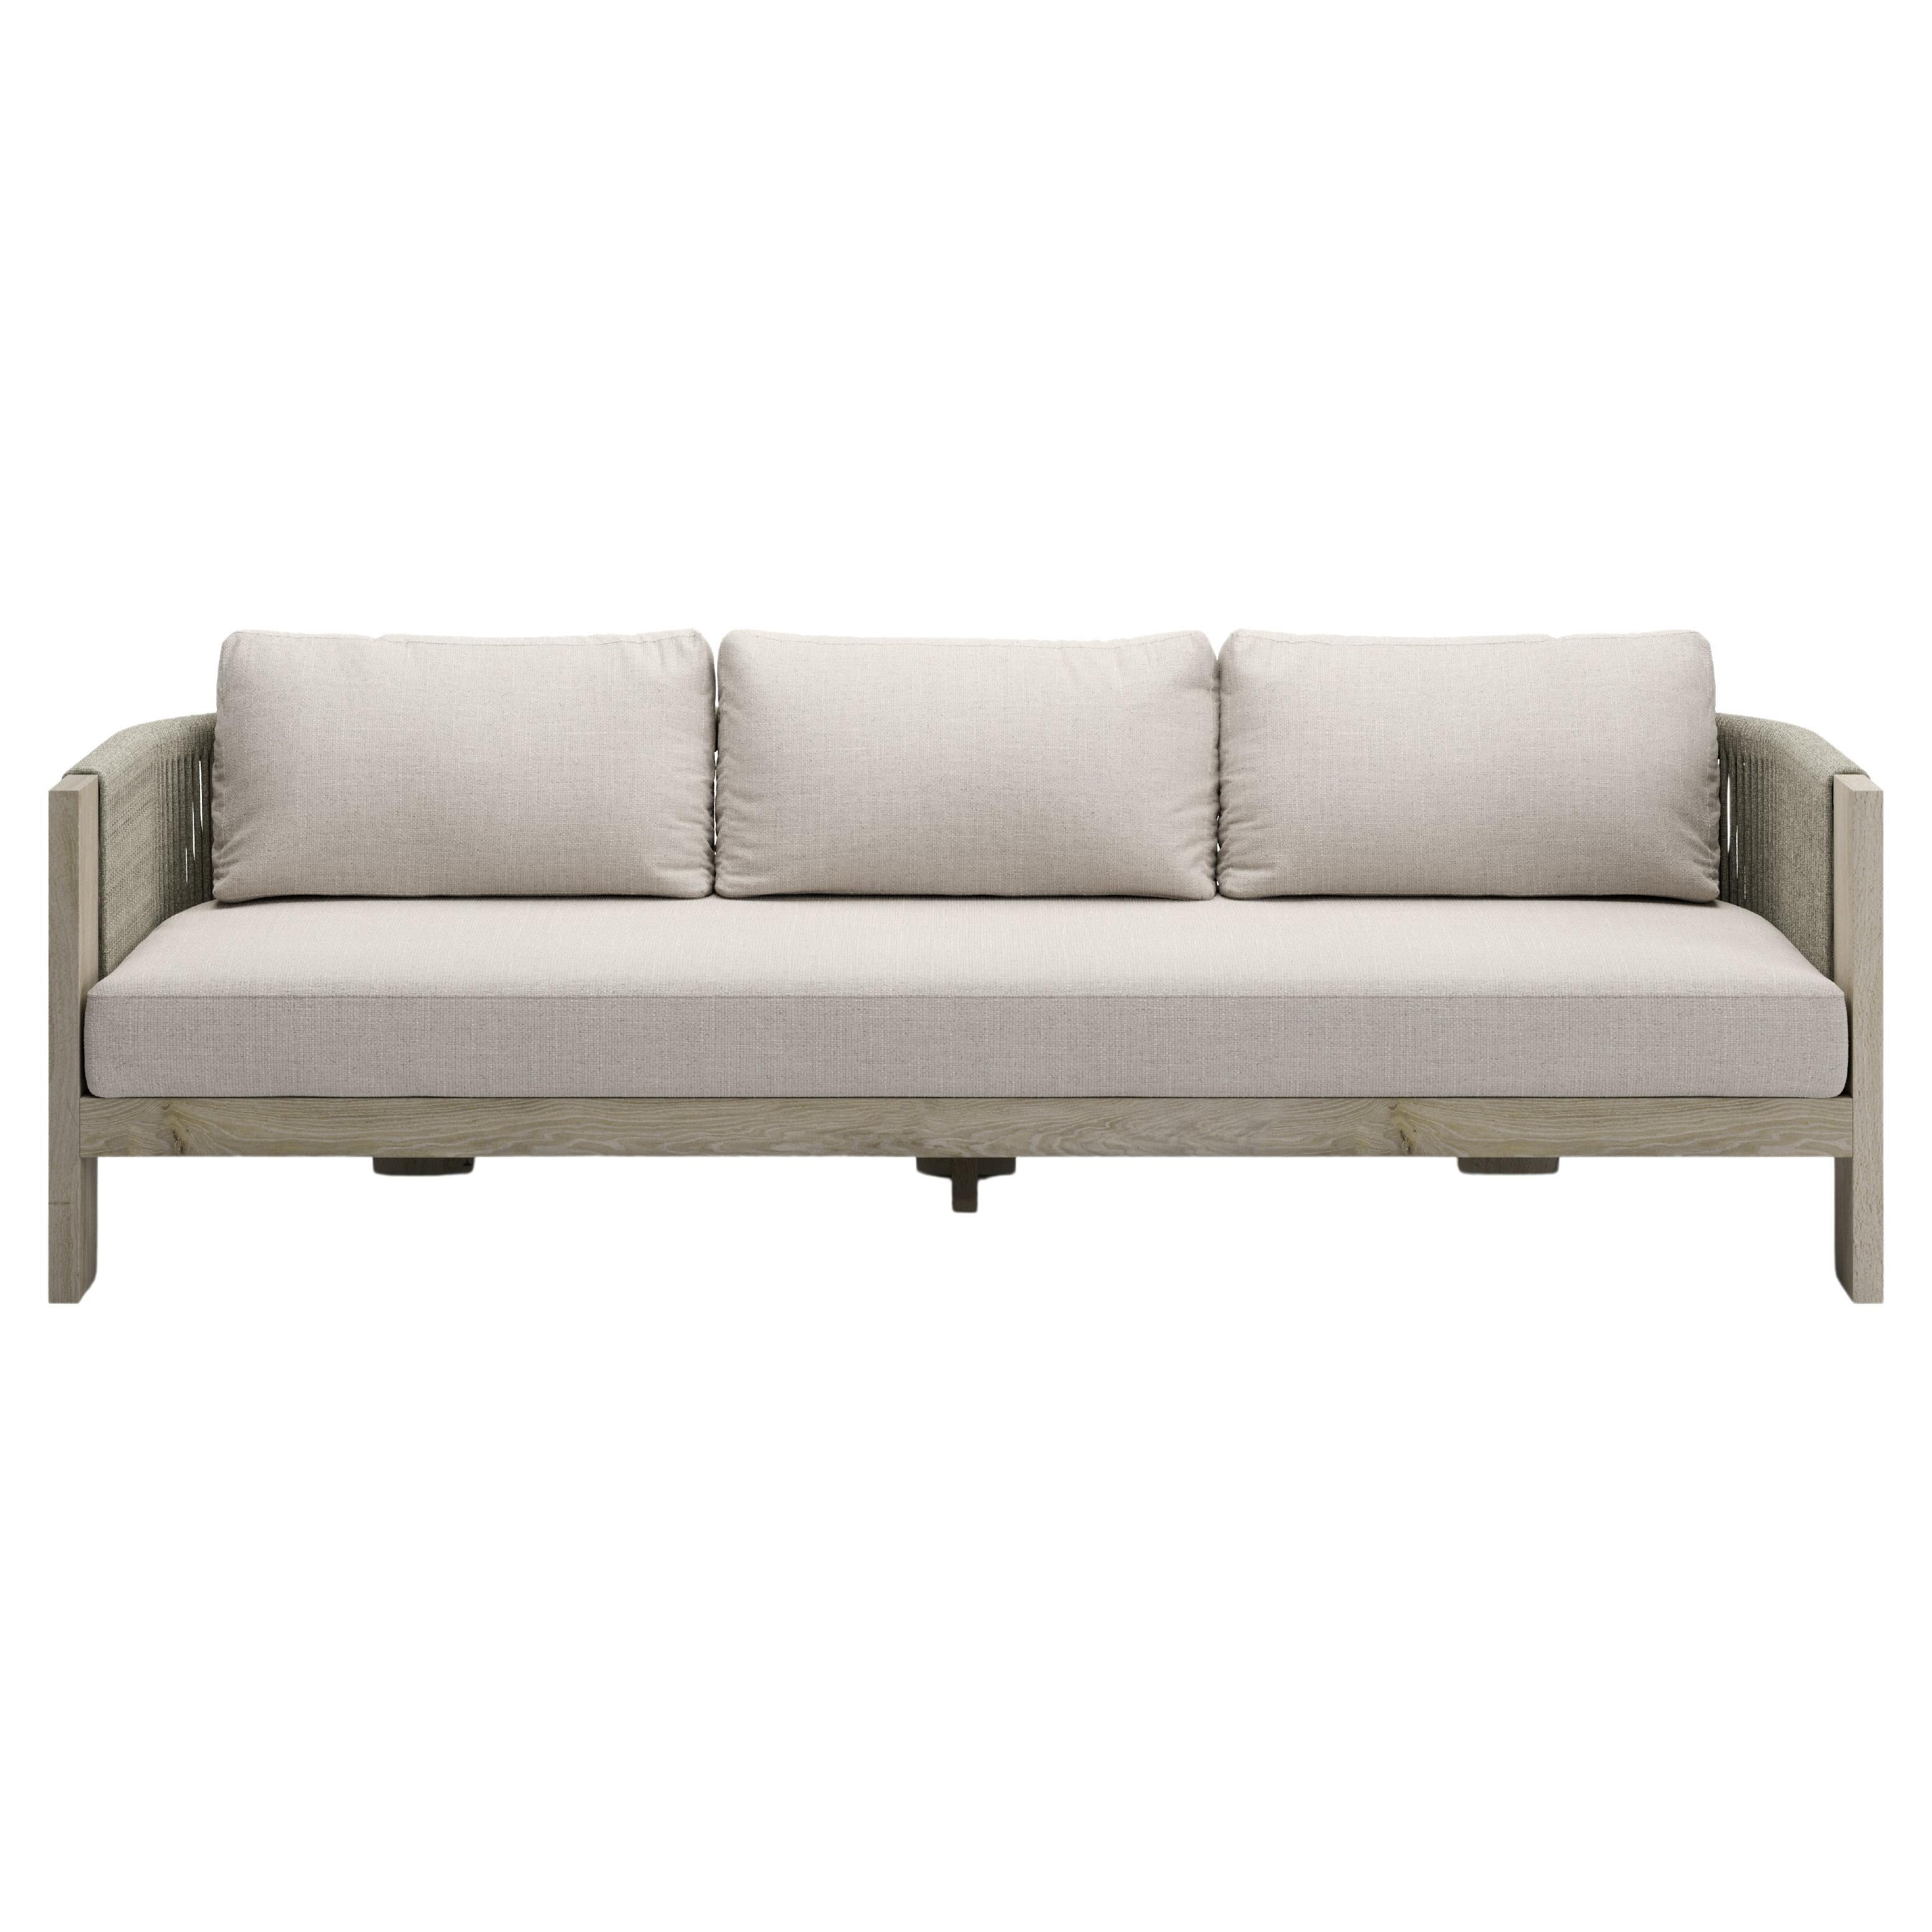 Ralph-ash Outdoor 3 Seater Sofa by Snoc